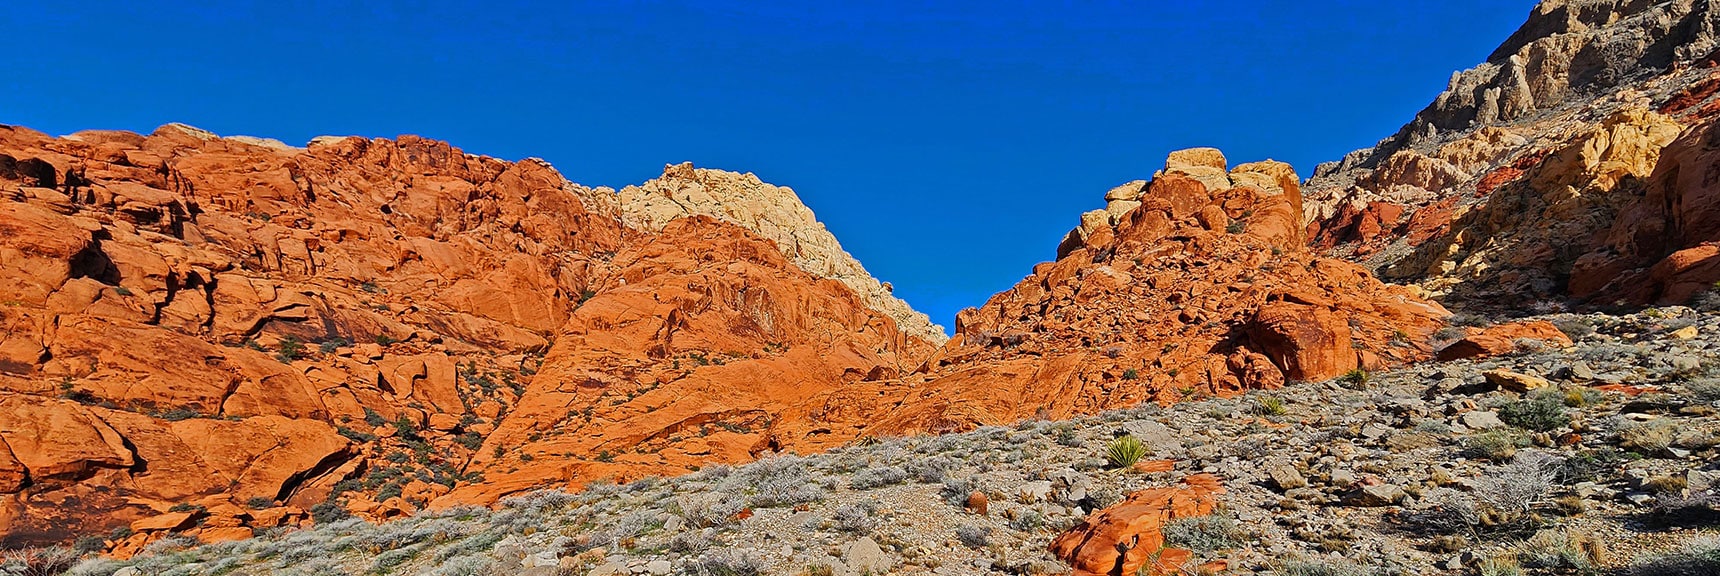 Approaching Ash Canyon to the Right of the Red Rock Mounds. | Ash Canyon to Calico Tanks | Calico Basin and Red Rock Canyon, Nevada | David Smith | Las Vegas Area Trails